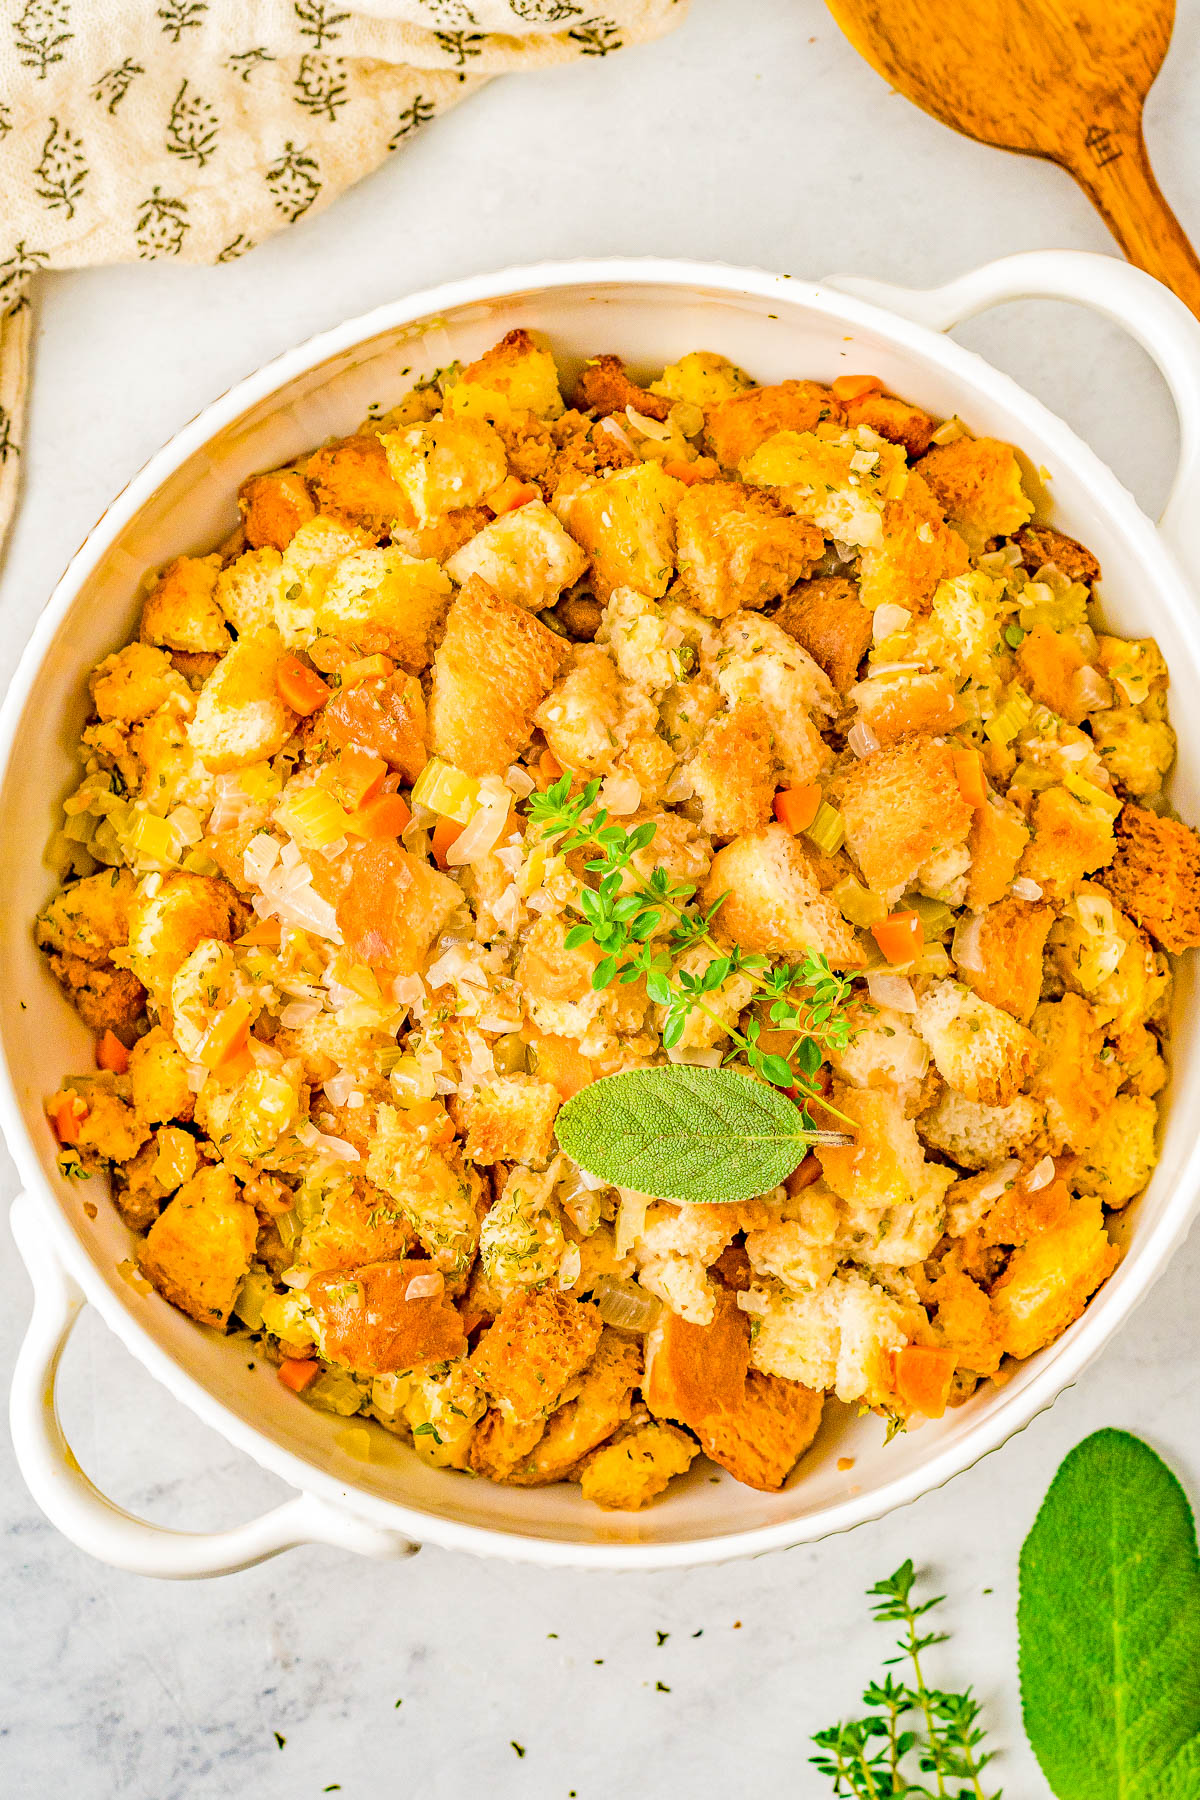 Stovetop Stuffing - With this easy homemade stuffing recipe, you'll never need a box of the store bought stuff again! Onions, carrots, and celery are sautéed in butter, seasoned with an aromatic bouquet of herbs, and cubed bread is stirred in to create the most perfect stuffing that's moist and tender! FAST, EASY, and guaranteed to become a Thanksgiving and Christmas family favorite!